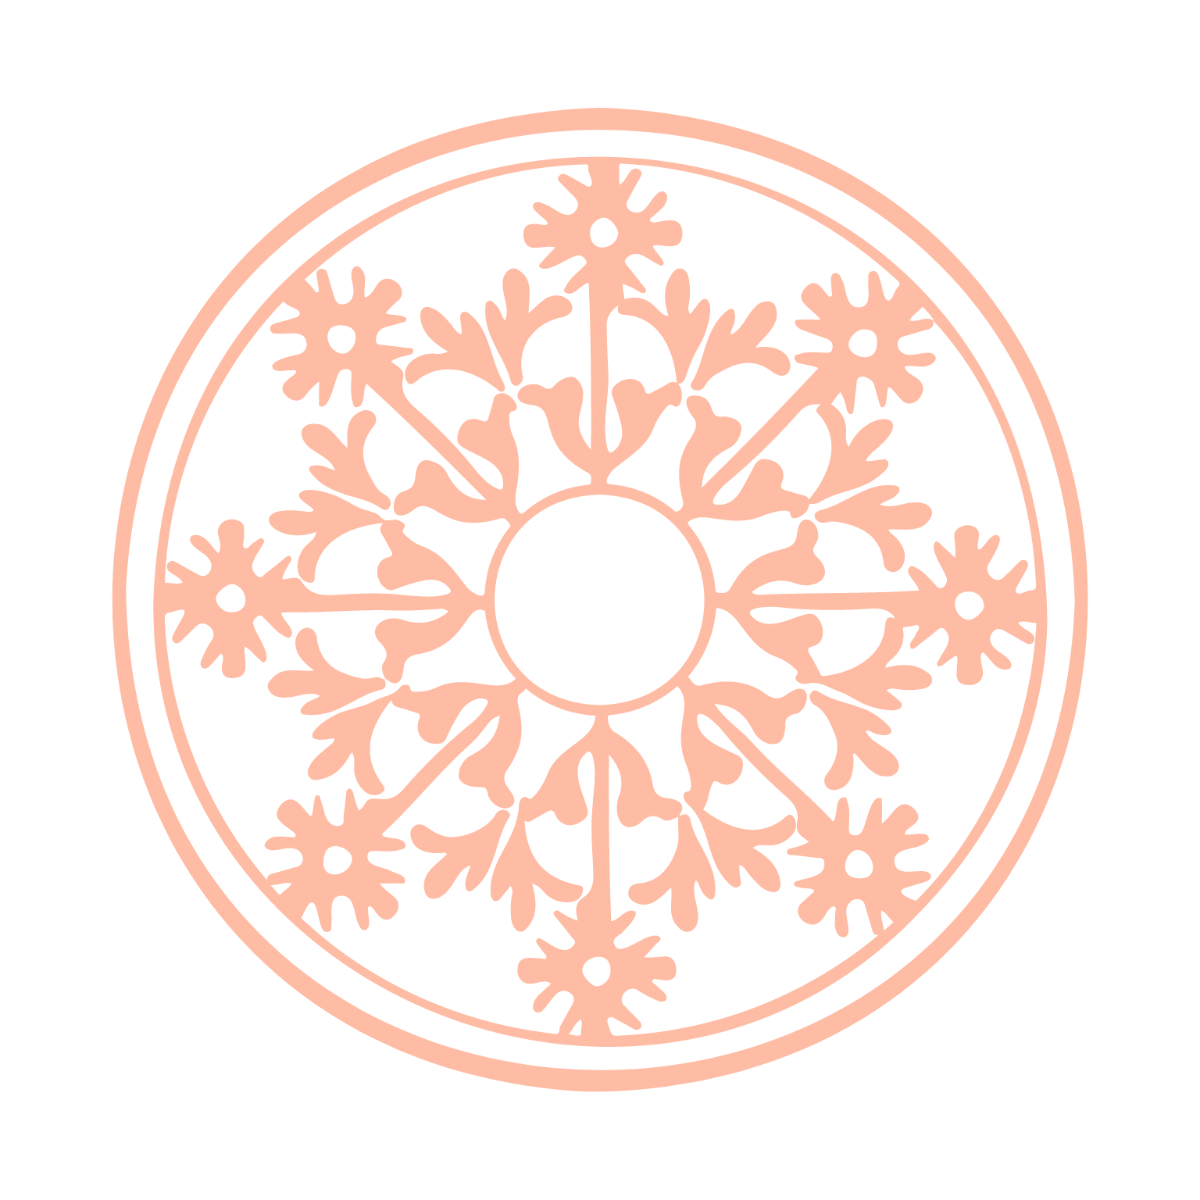 Free Circle Ornament clipart Template